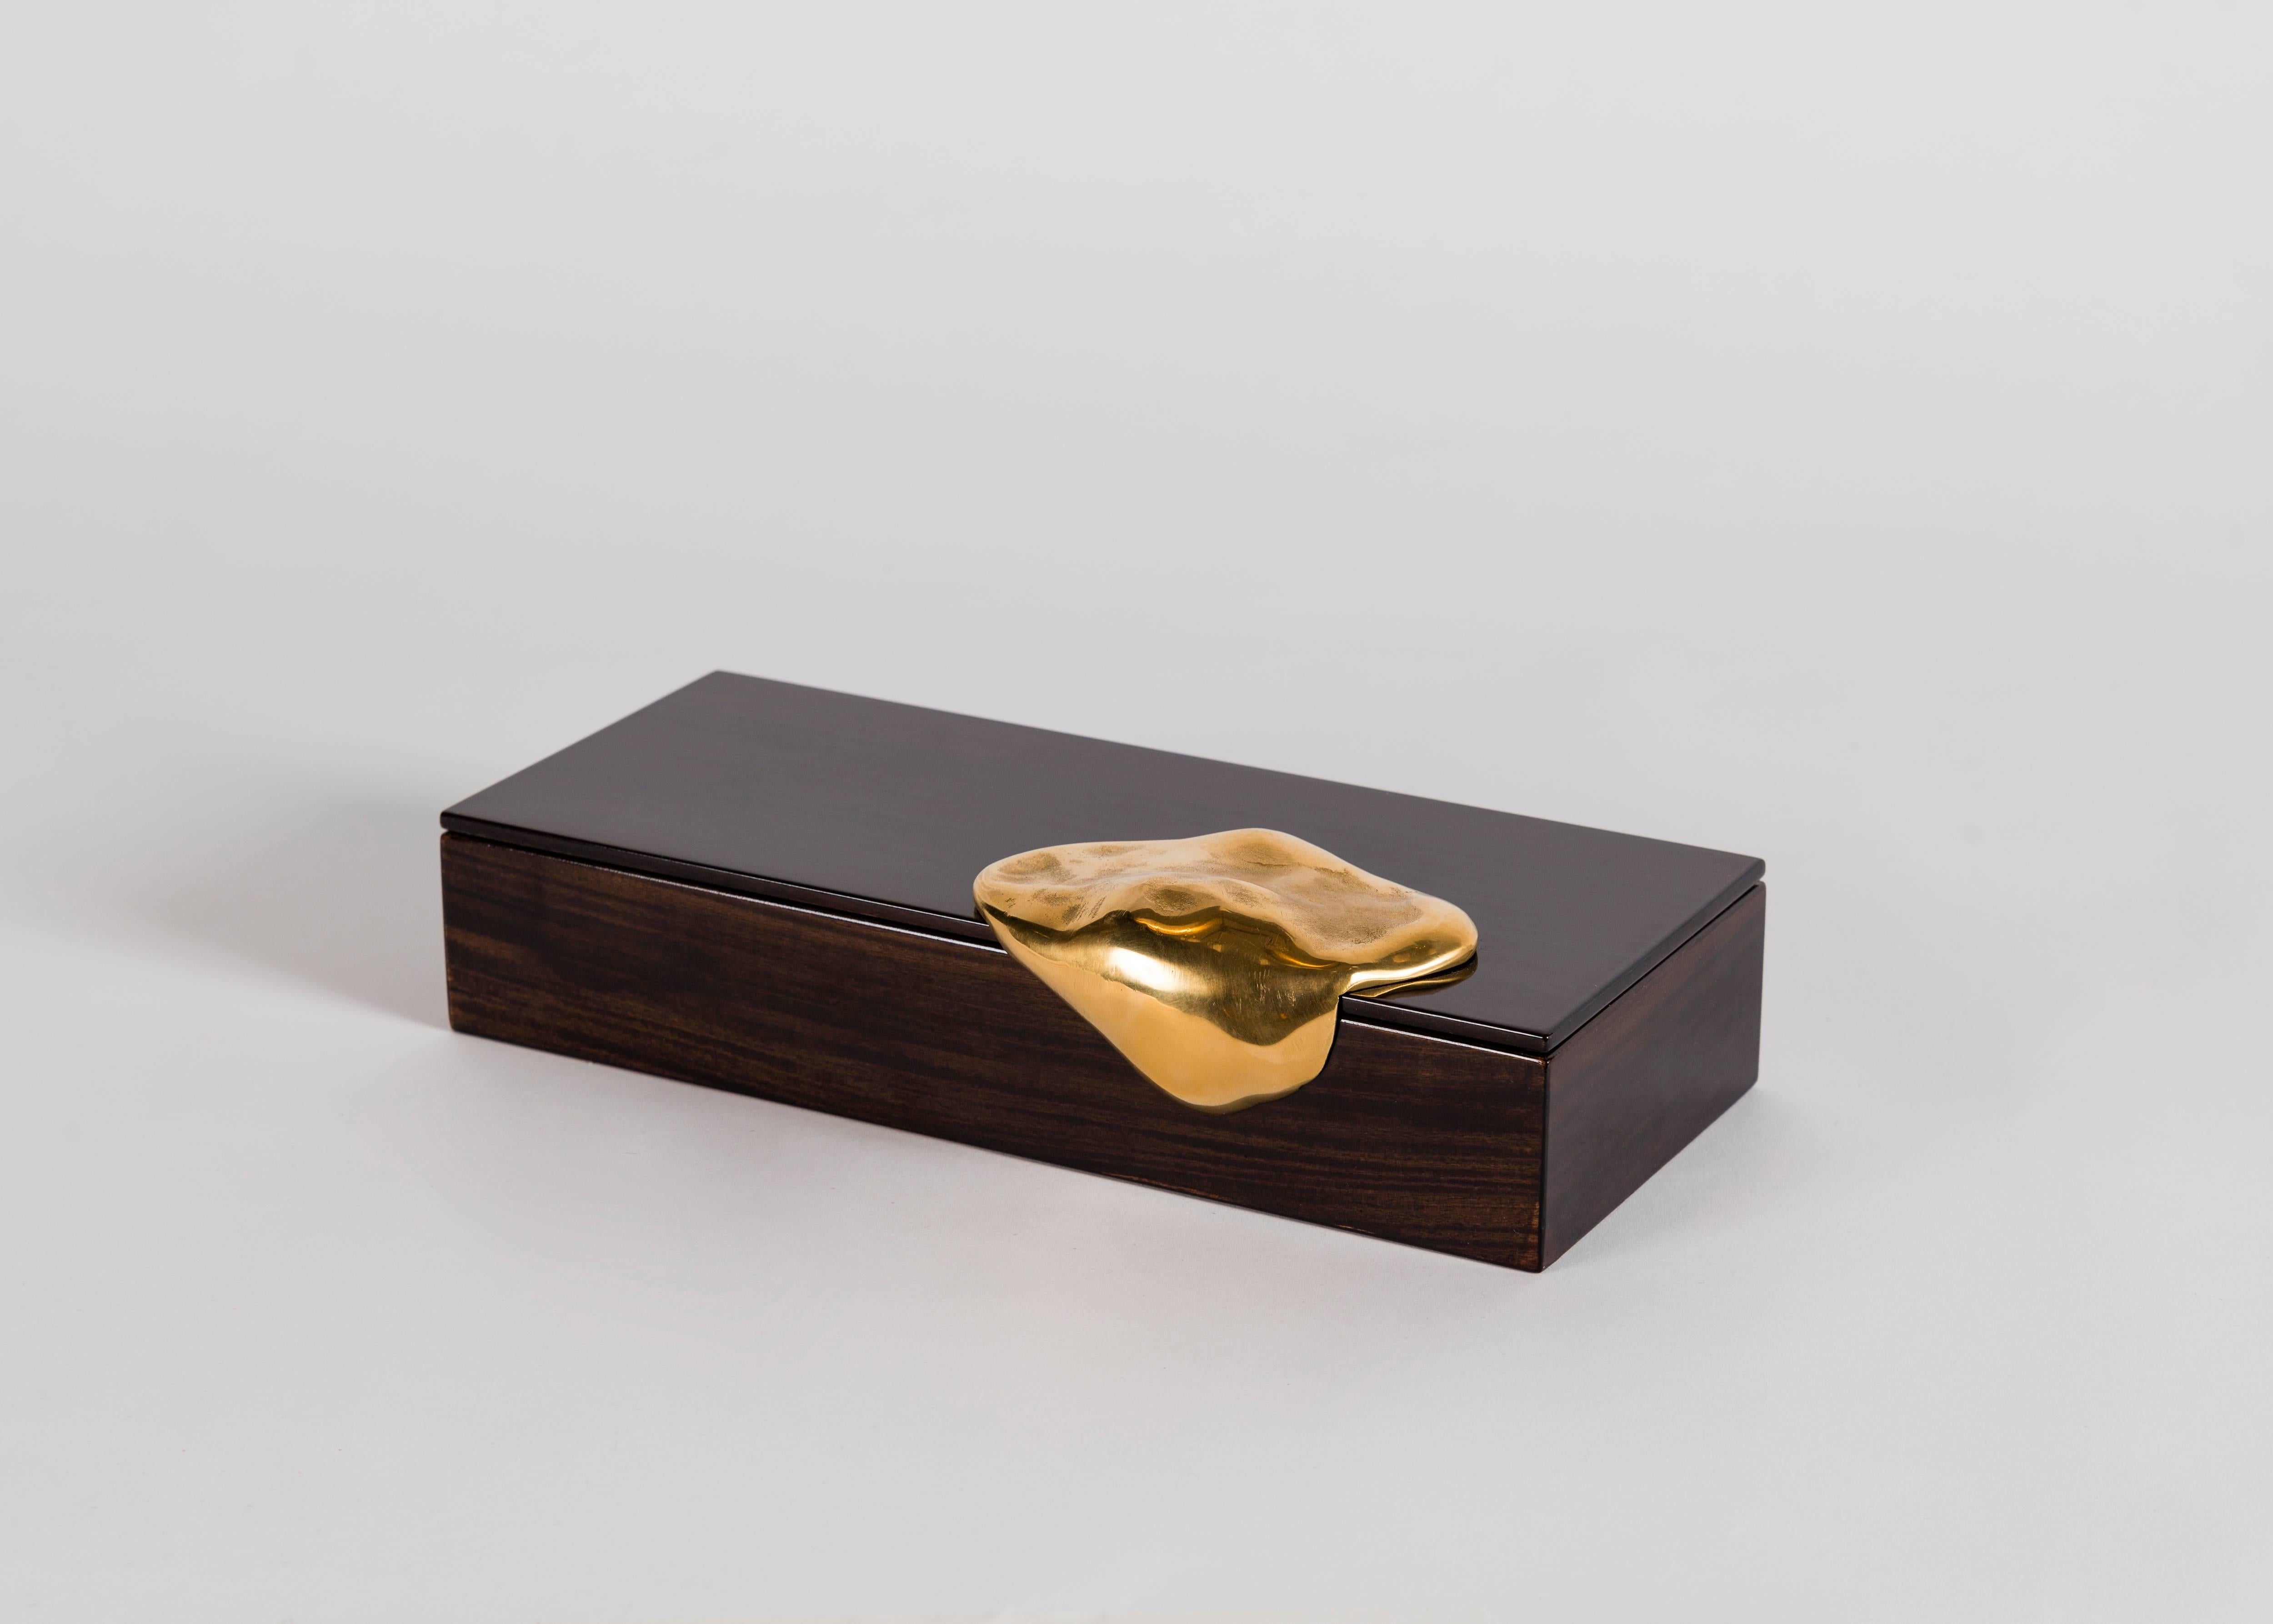 Hand polished royal oak box with gilt bronze handle. The interior base of the box is lined with hand woven silk. Edition of 100.

A collaboration between Achille Salvagni and Fabio Gnessi, Aldus aims to revive the aesthetic ideals of Greek and Latin